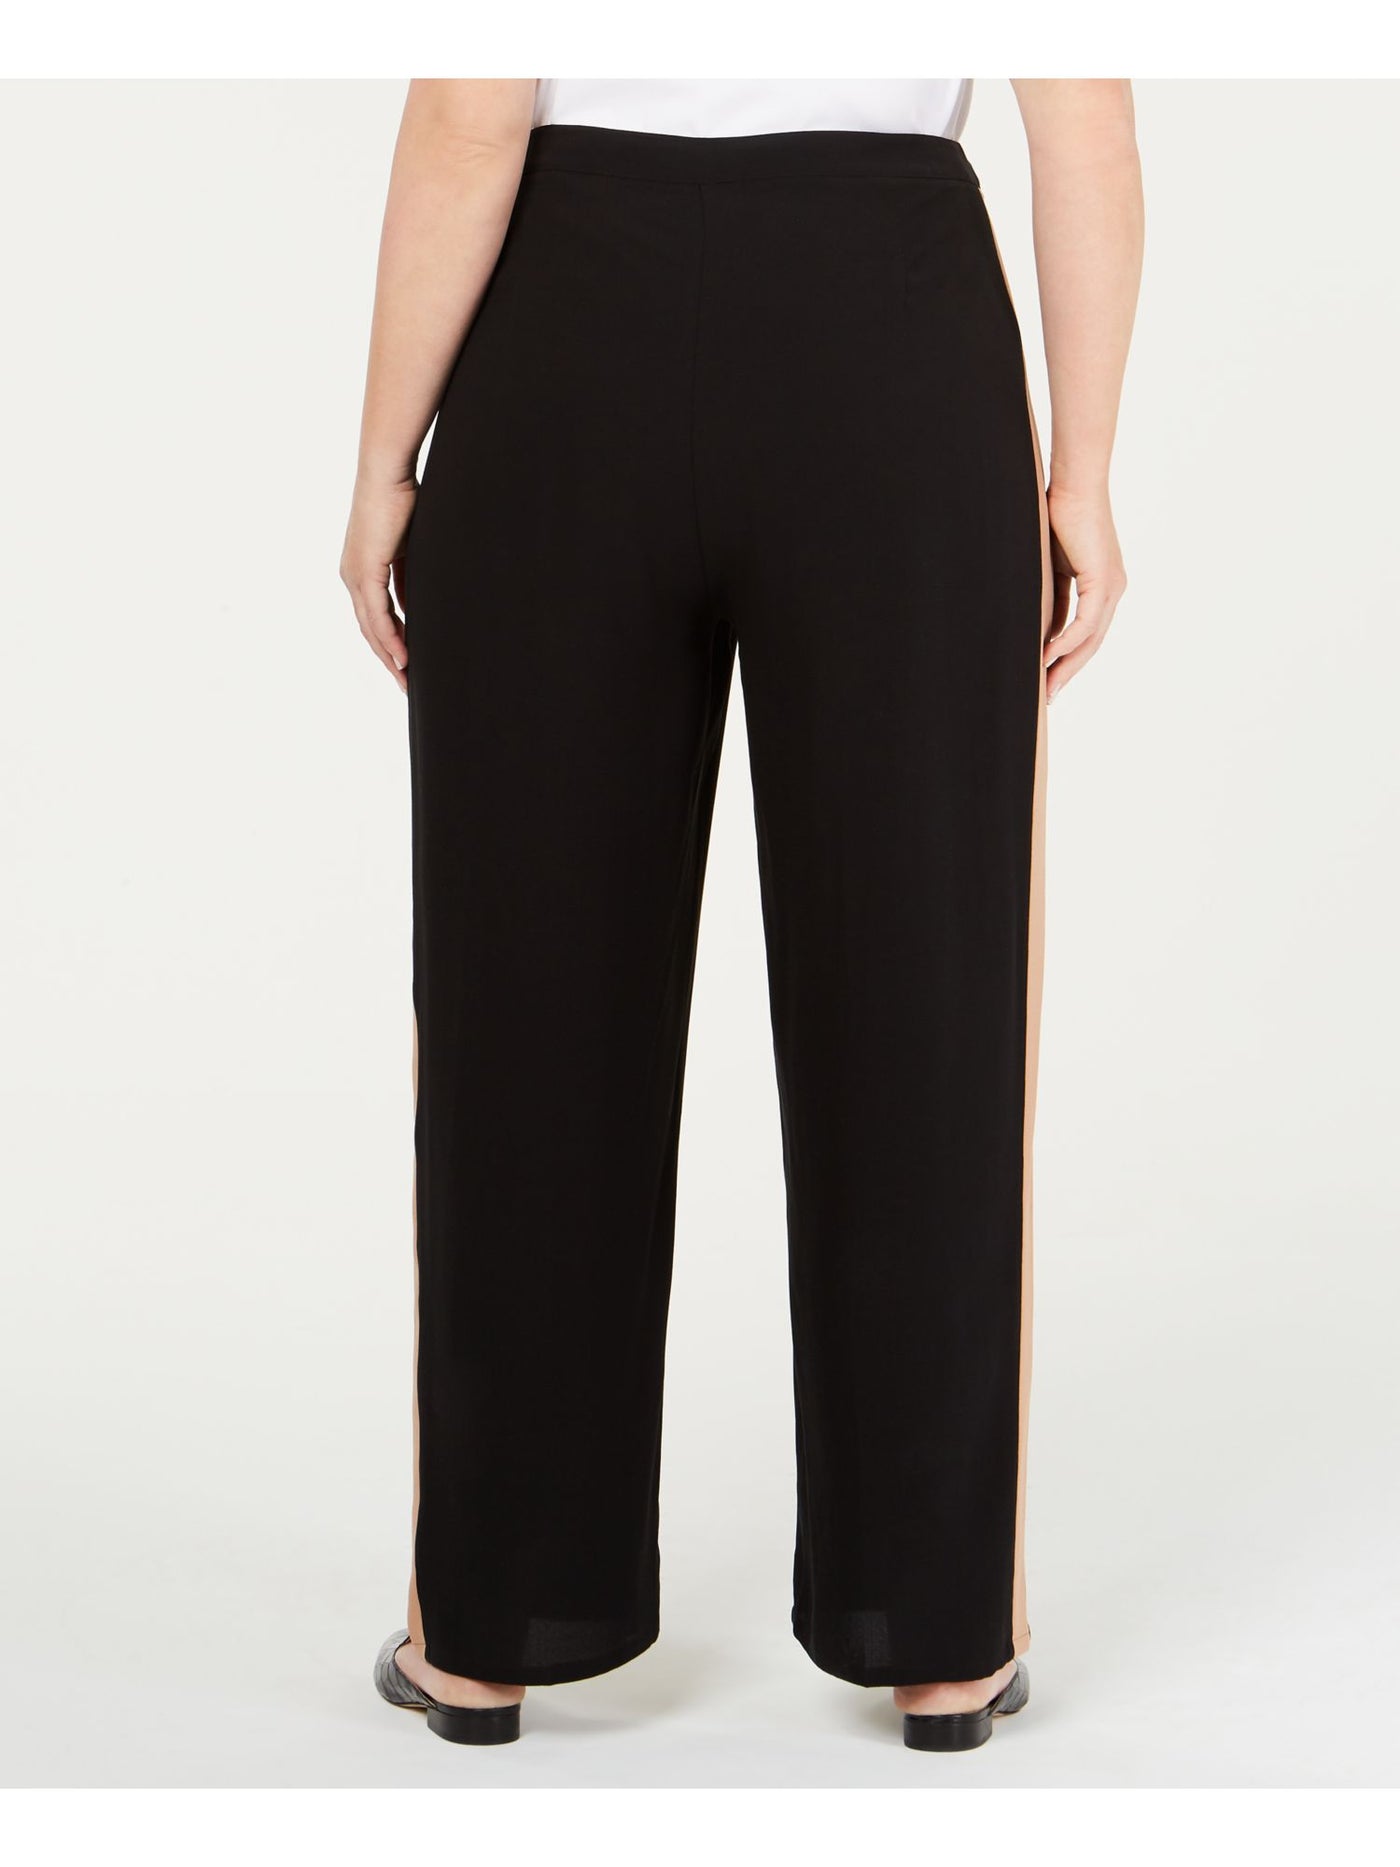 EILEEN FISHER Womens Black Textured Zippered Pocketed Hook And Bar Sheer Color Block High Waist Pants Plus 22W